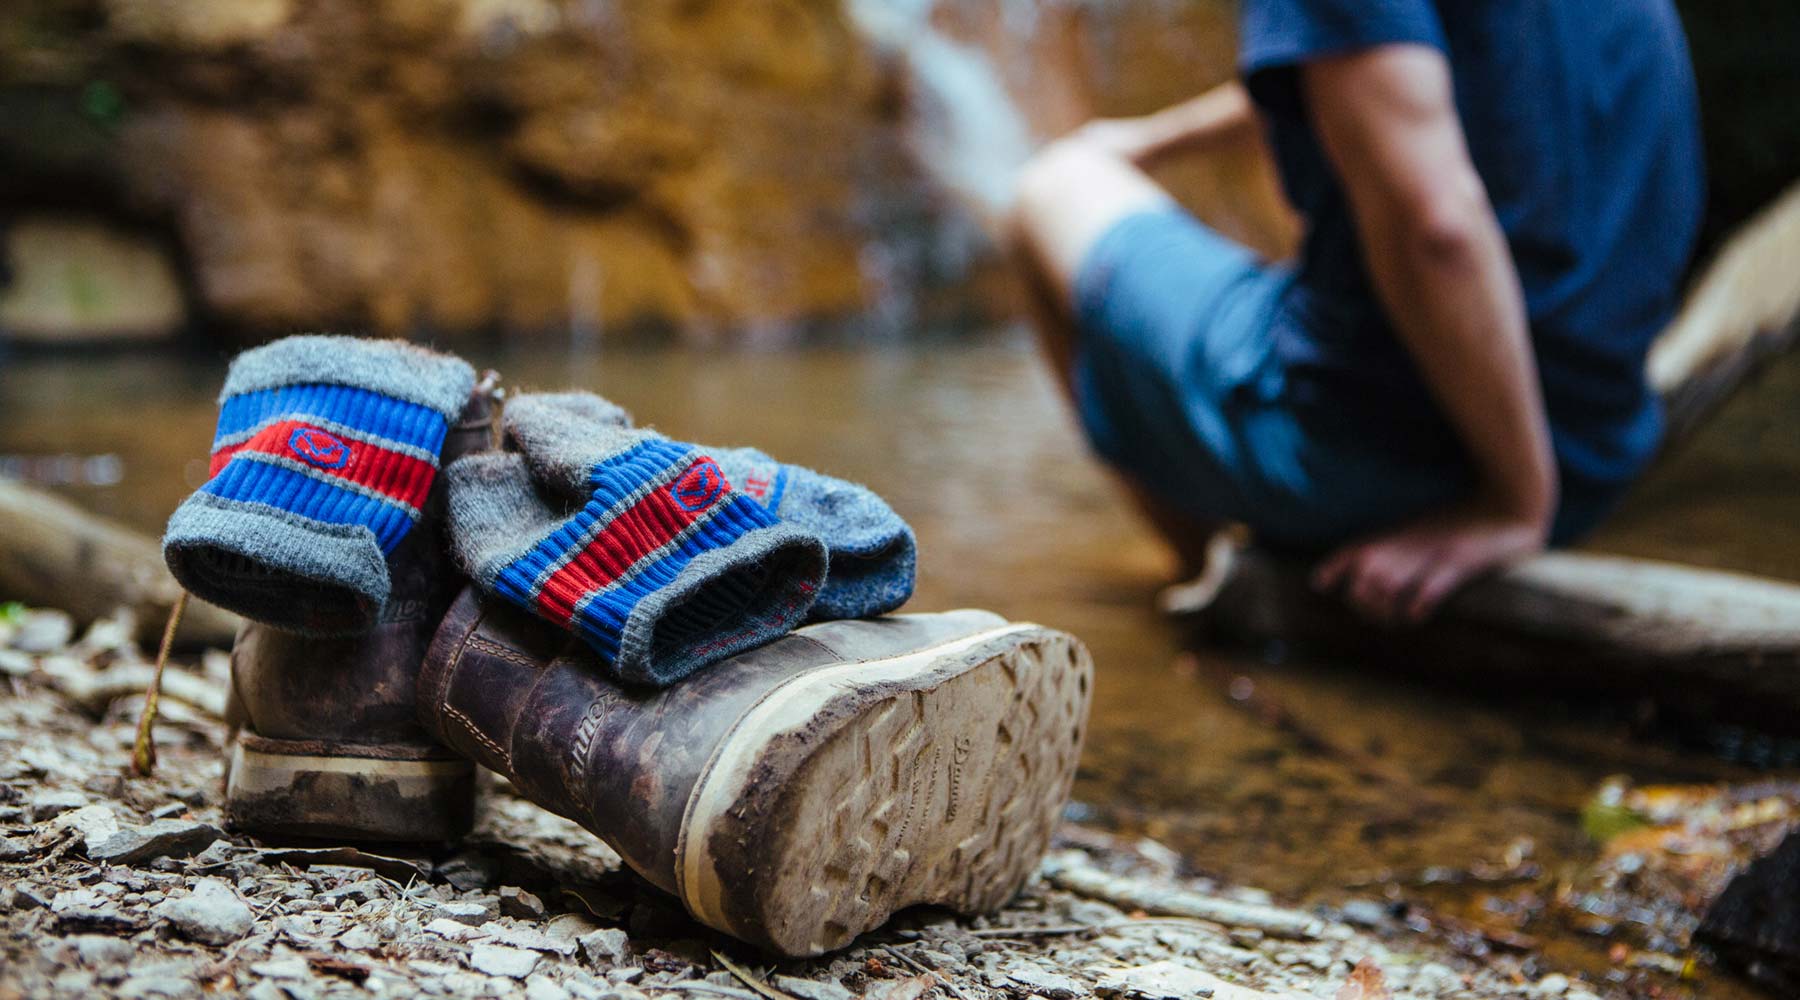 How to Take Care of Your Socks? - Care & Laundry Guide – Cloudline Apparel